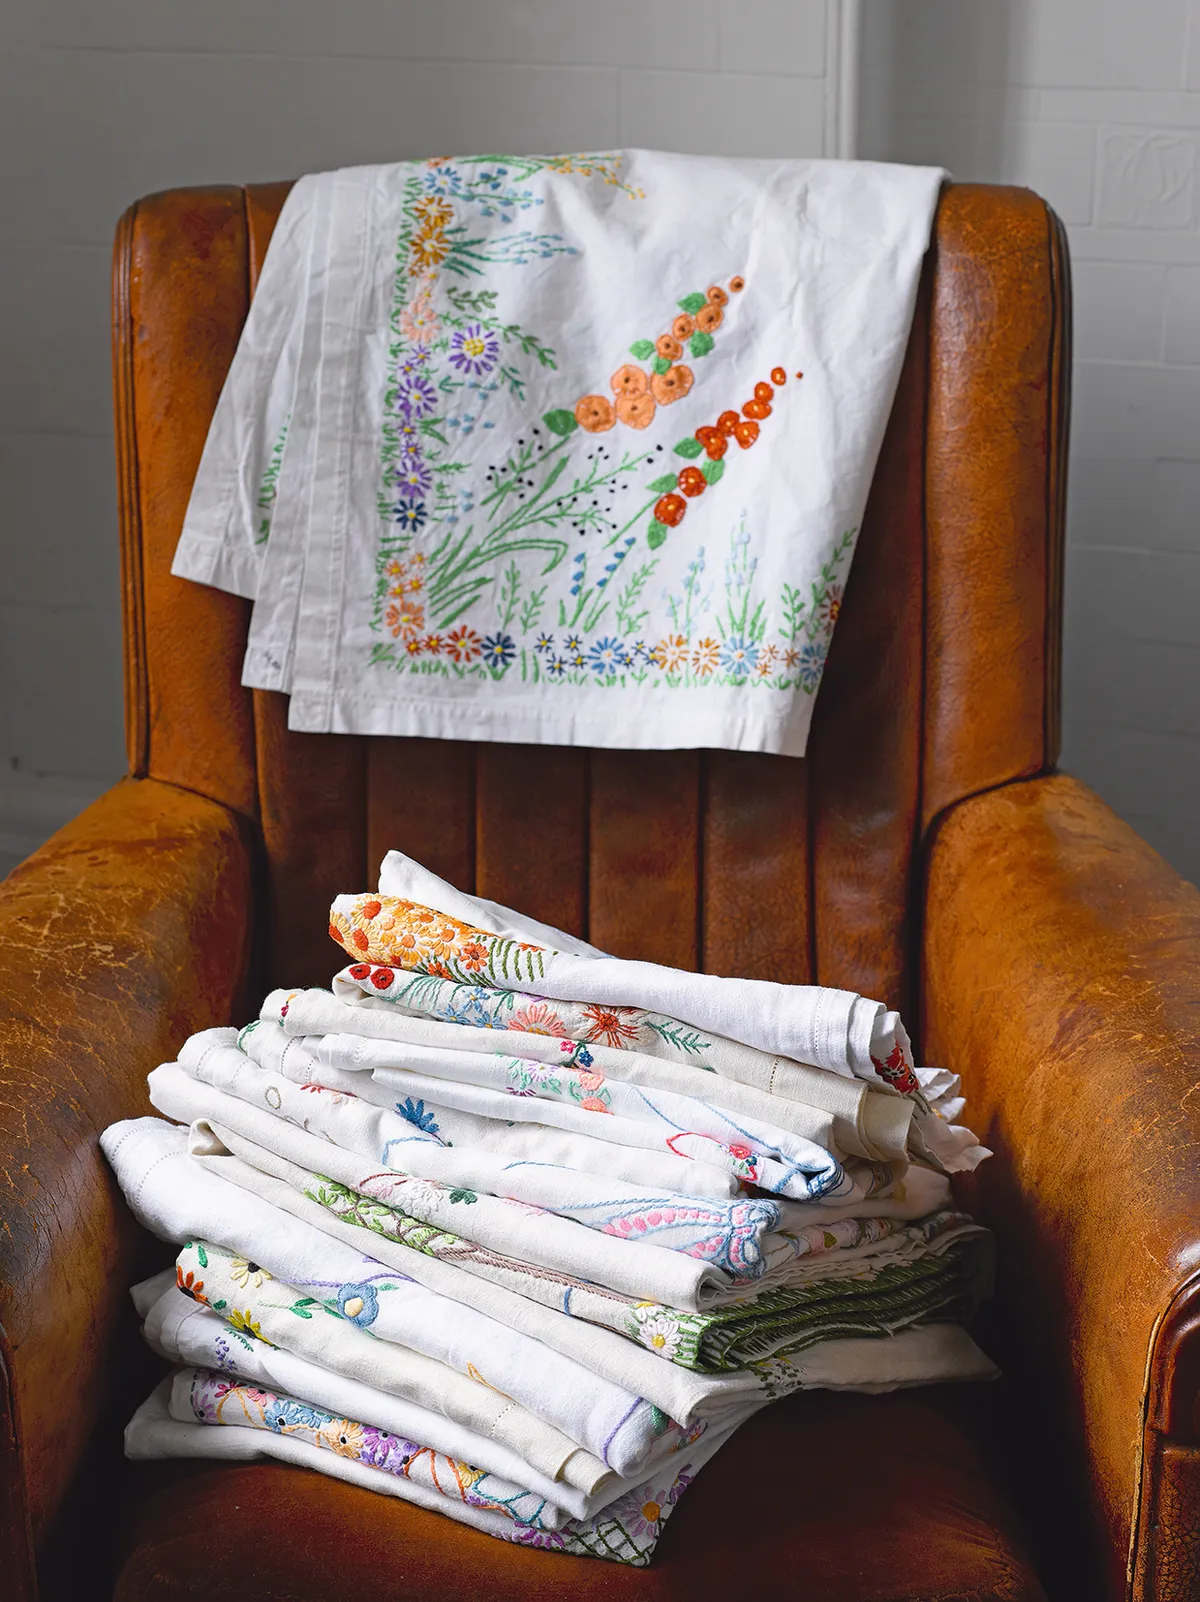 Embroidered tablecloths on an antique armchair.